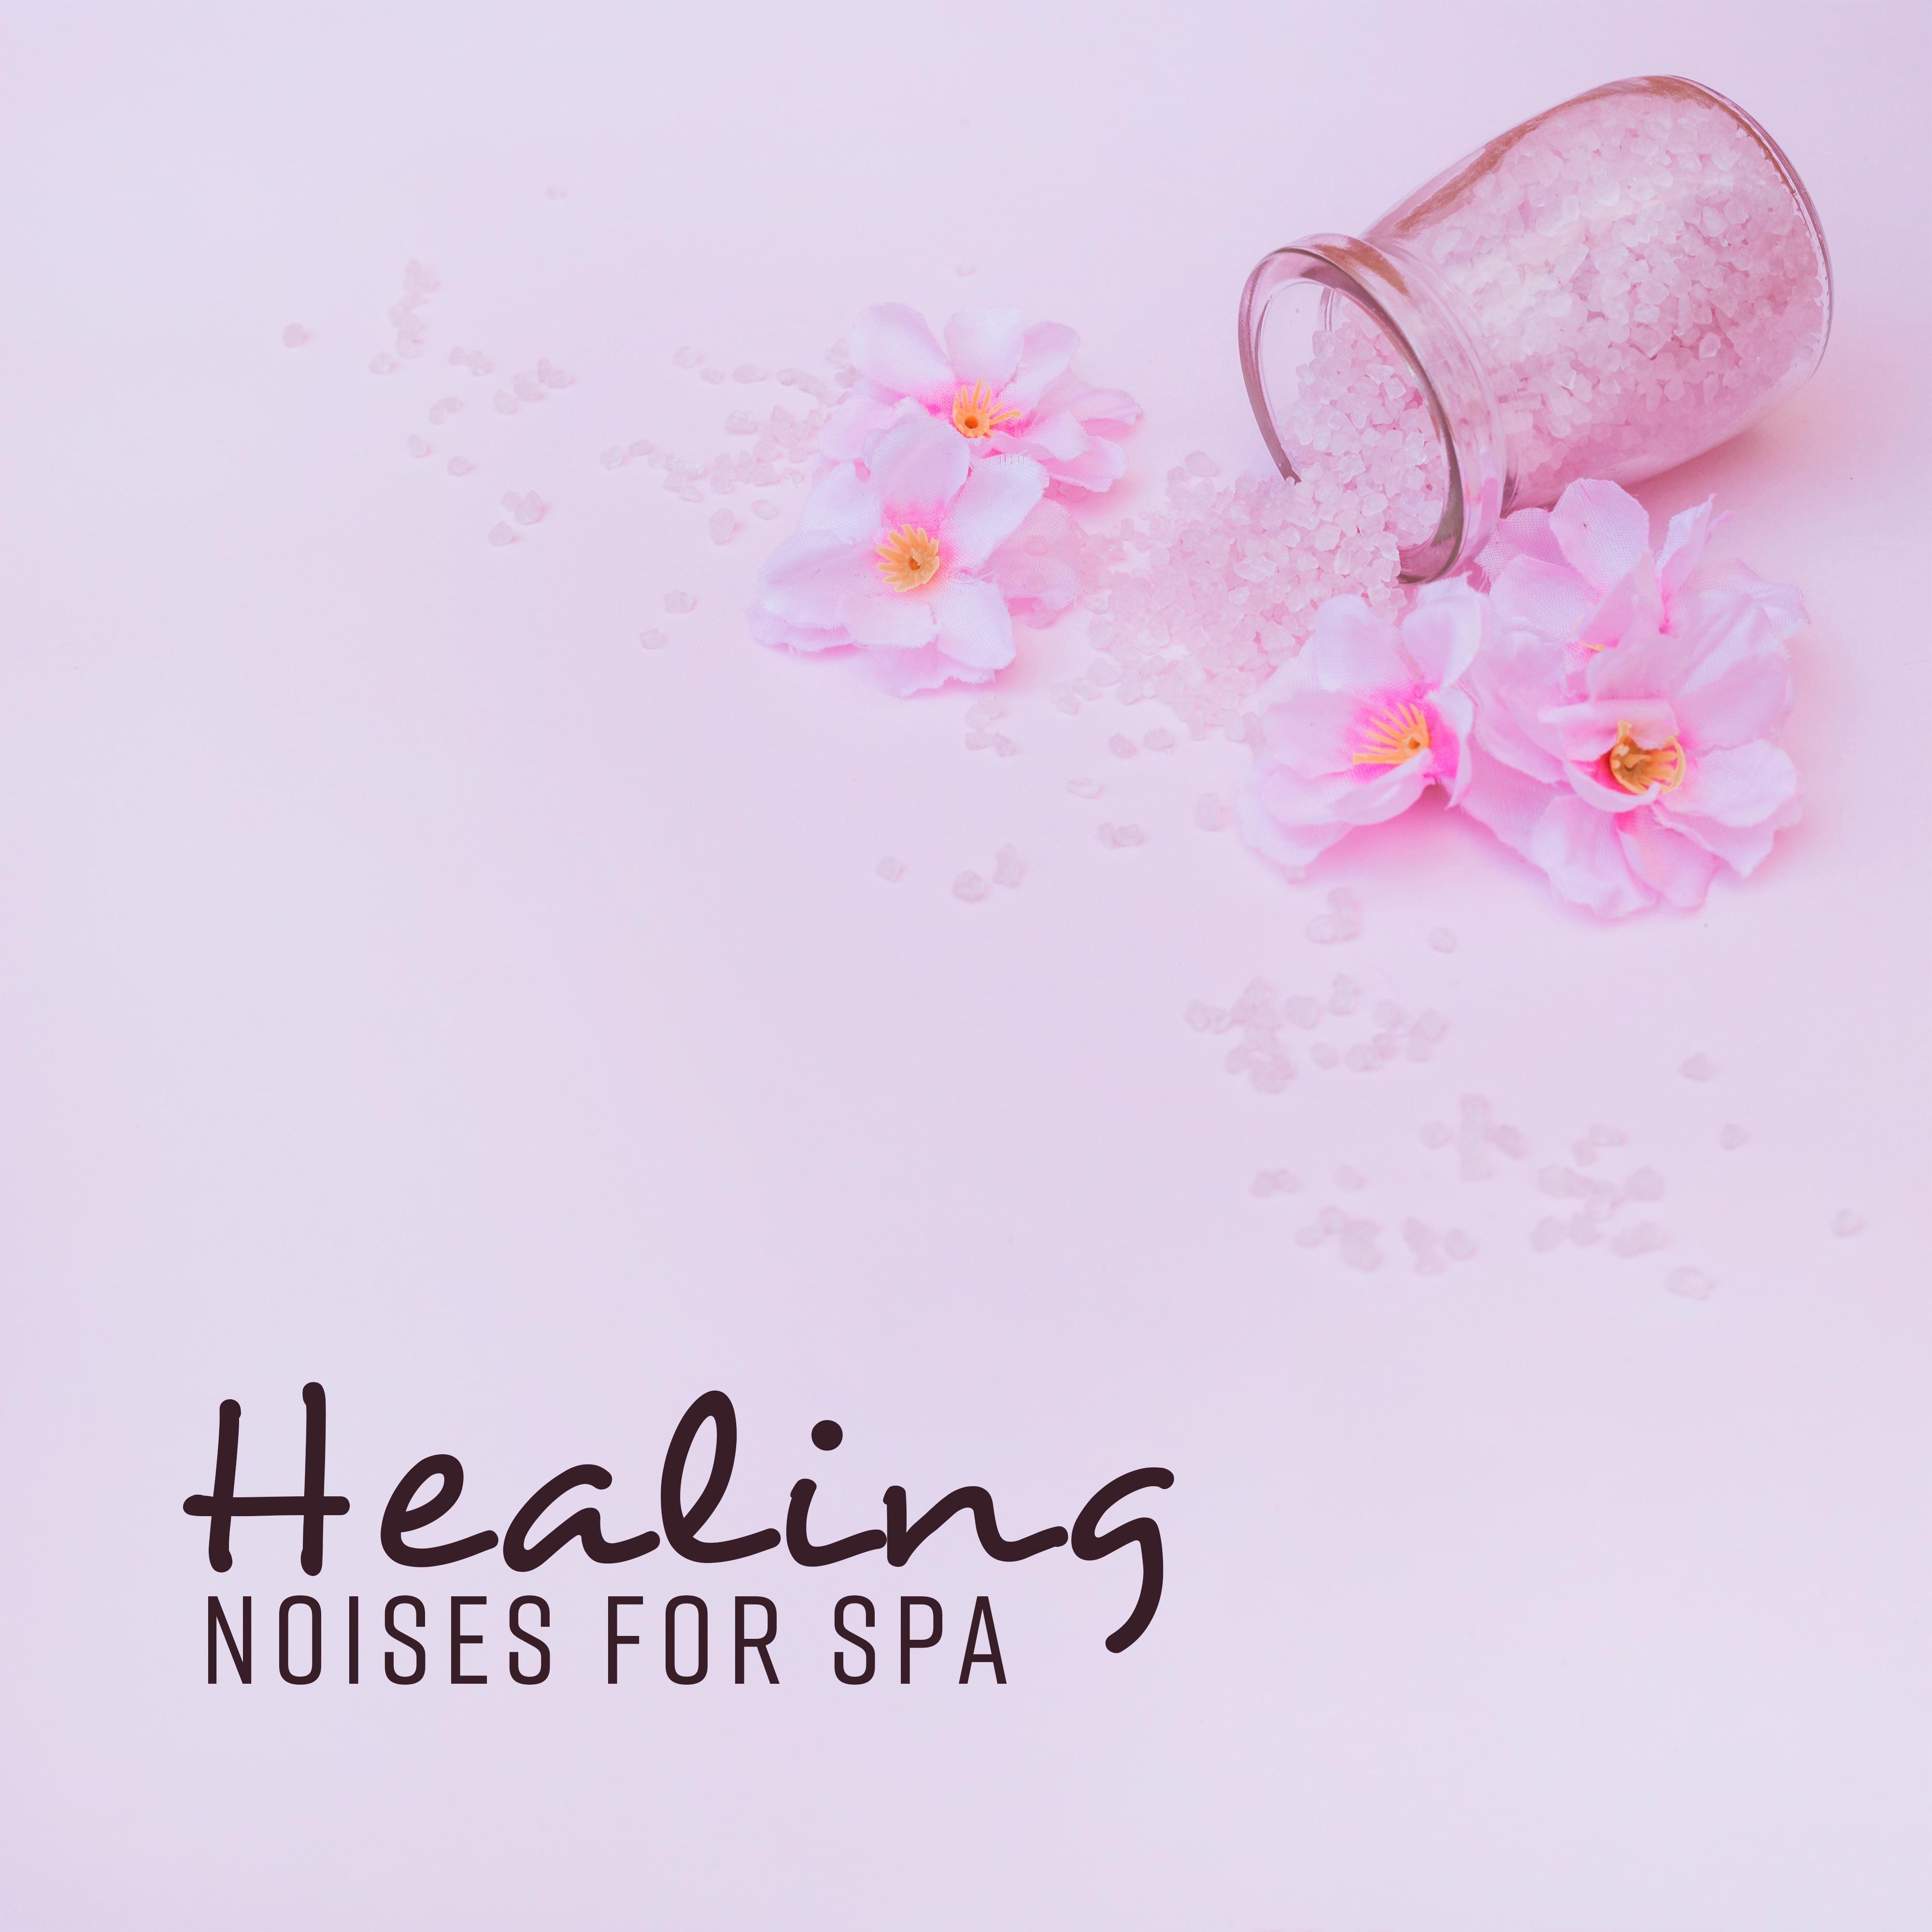 Healing Noises for Spa